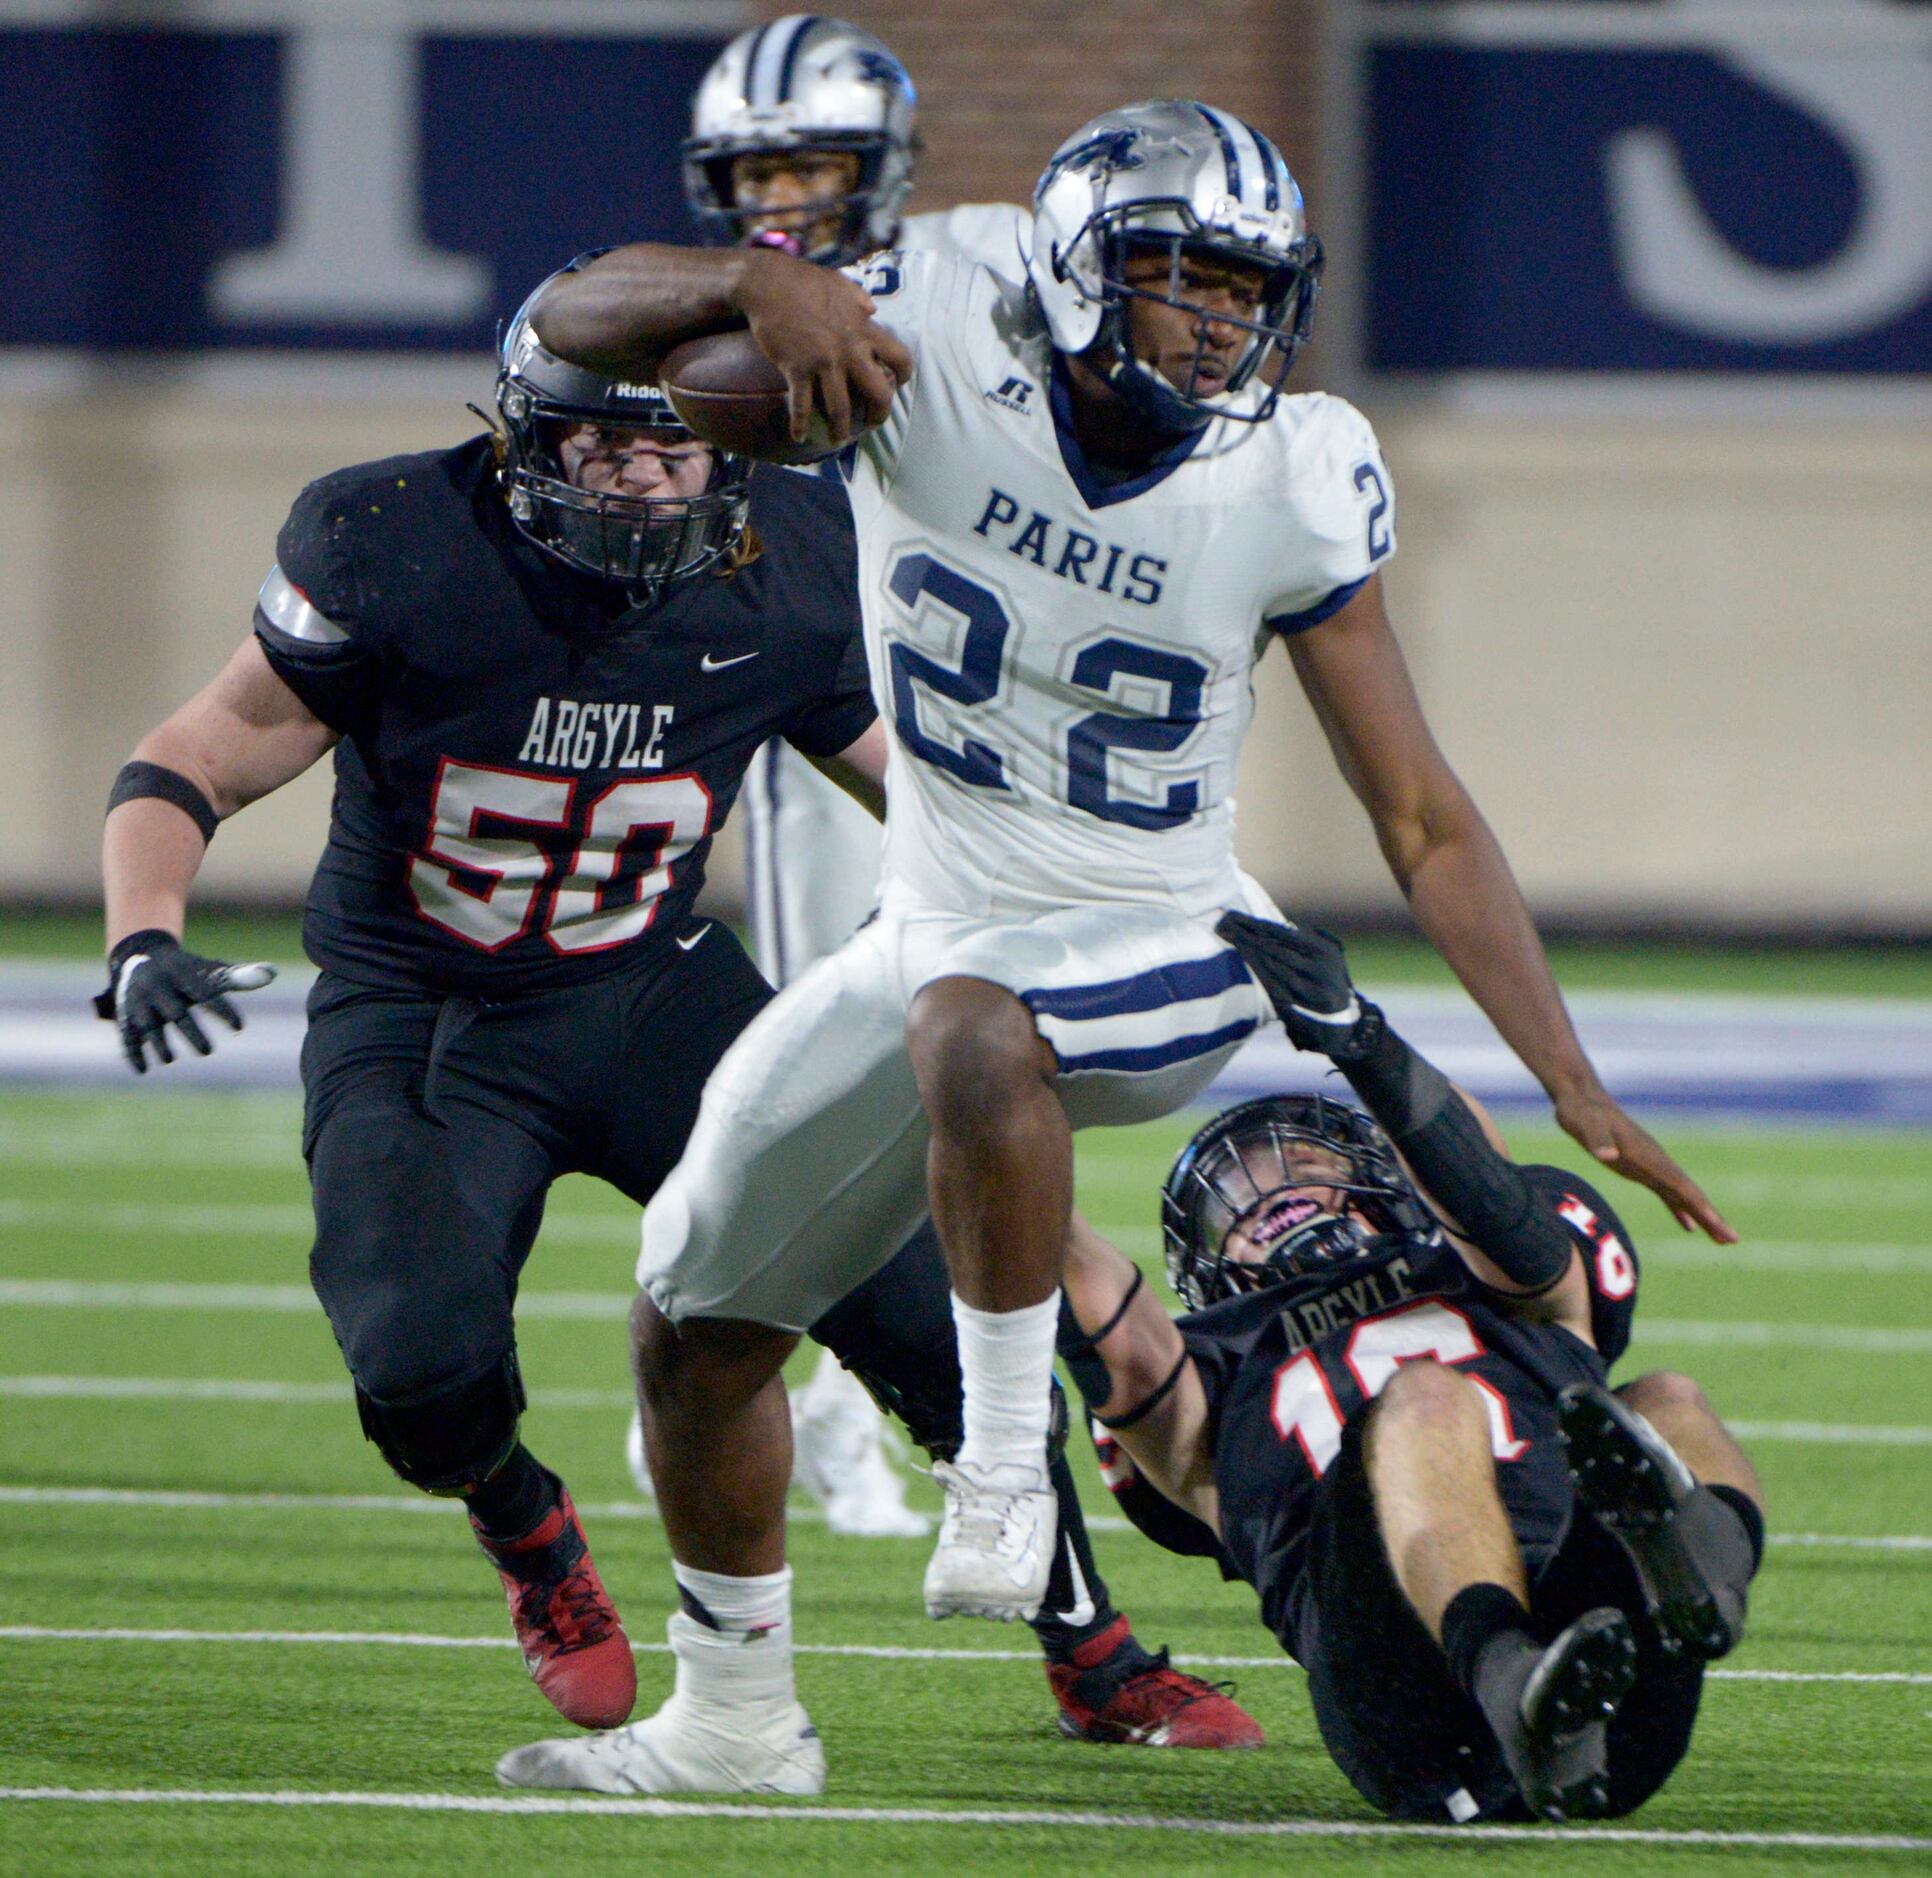 Paris’ Zy’kius Jackson runs between Argyle’s Jacob Robinson (16) and Chase Bunnell (50) in...